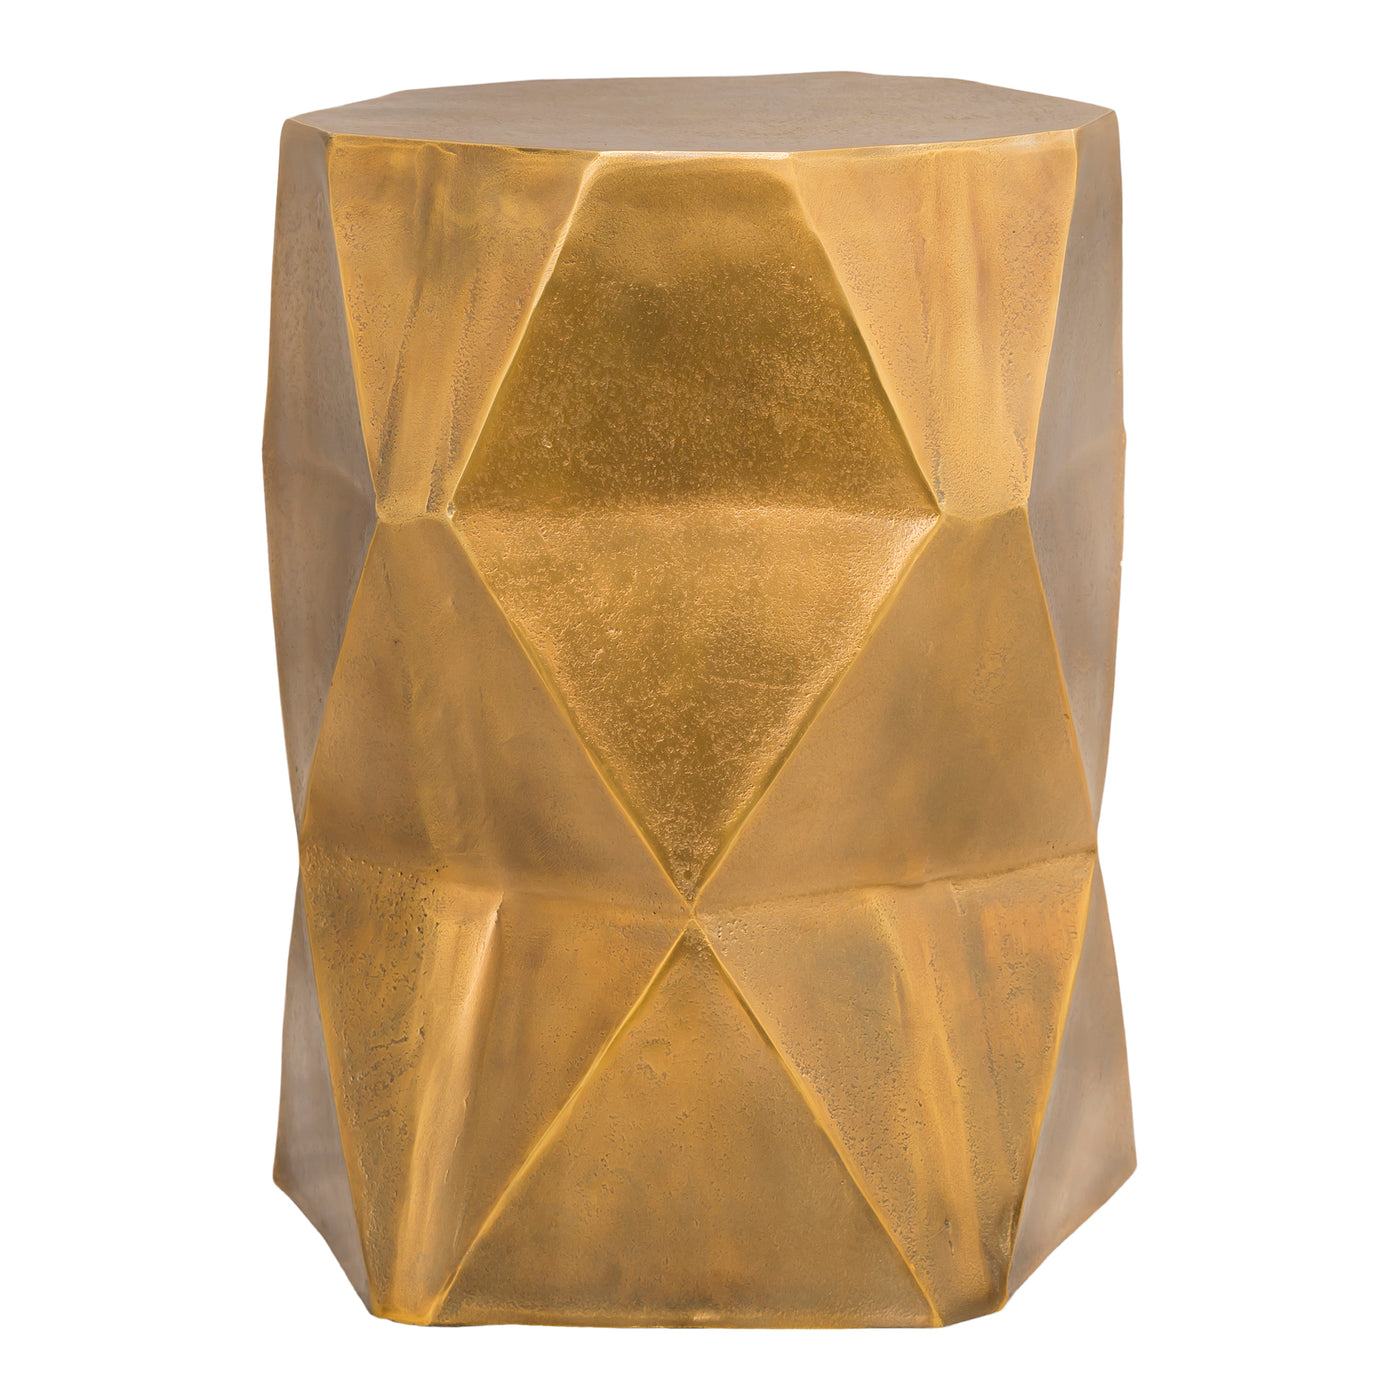 In a bold geometric design, the Quintus accent table brings a modern feel to your space. Finished in antique brass, this t...